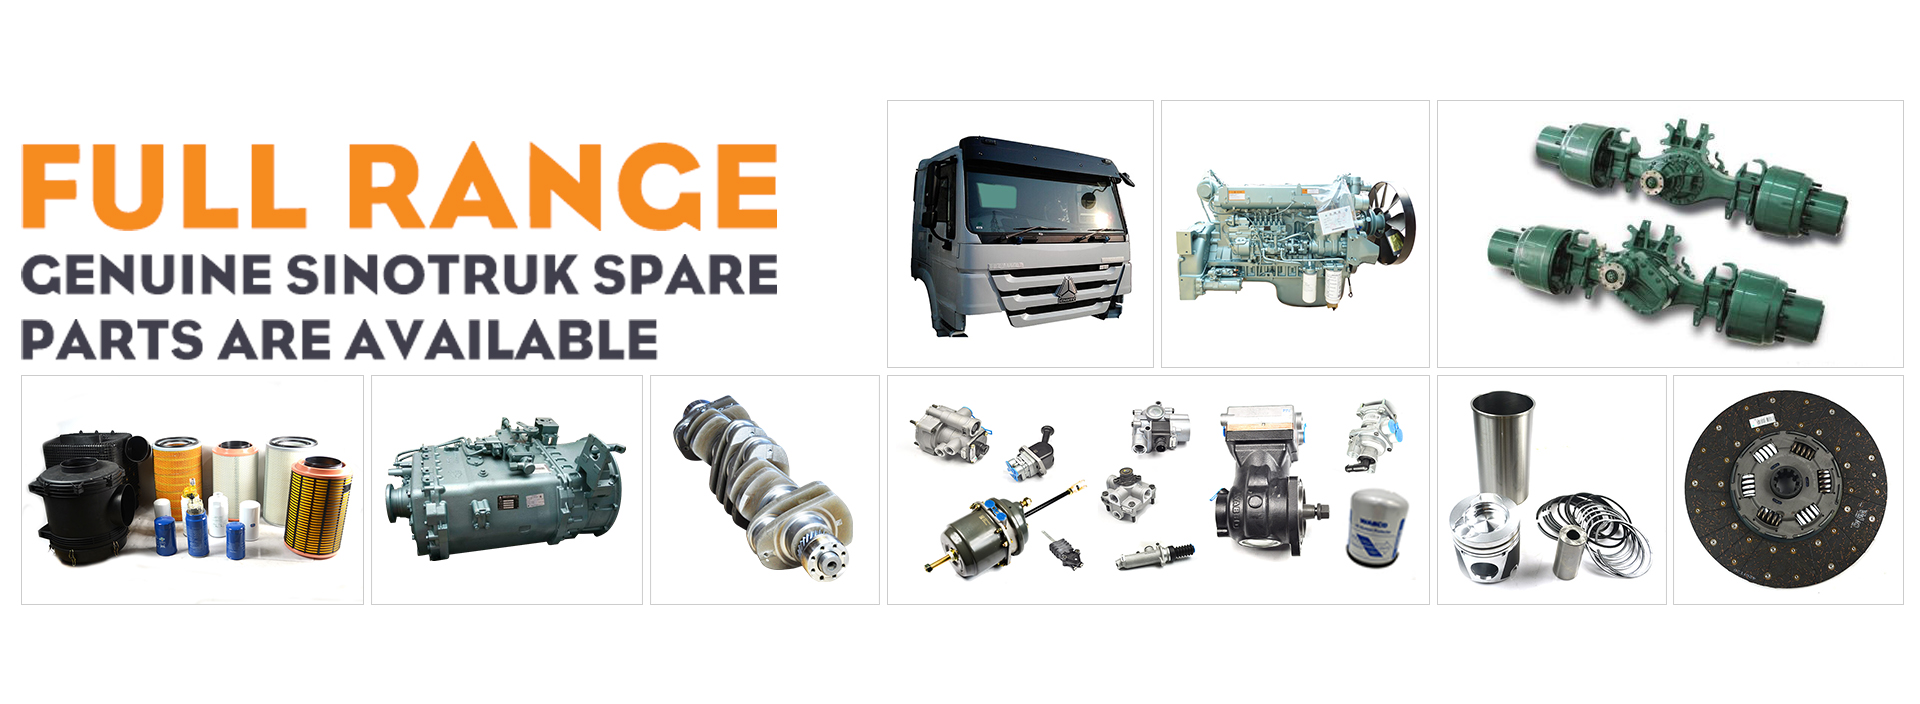 Heavy Truck Parts and Accessories suppliers